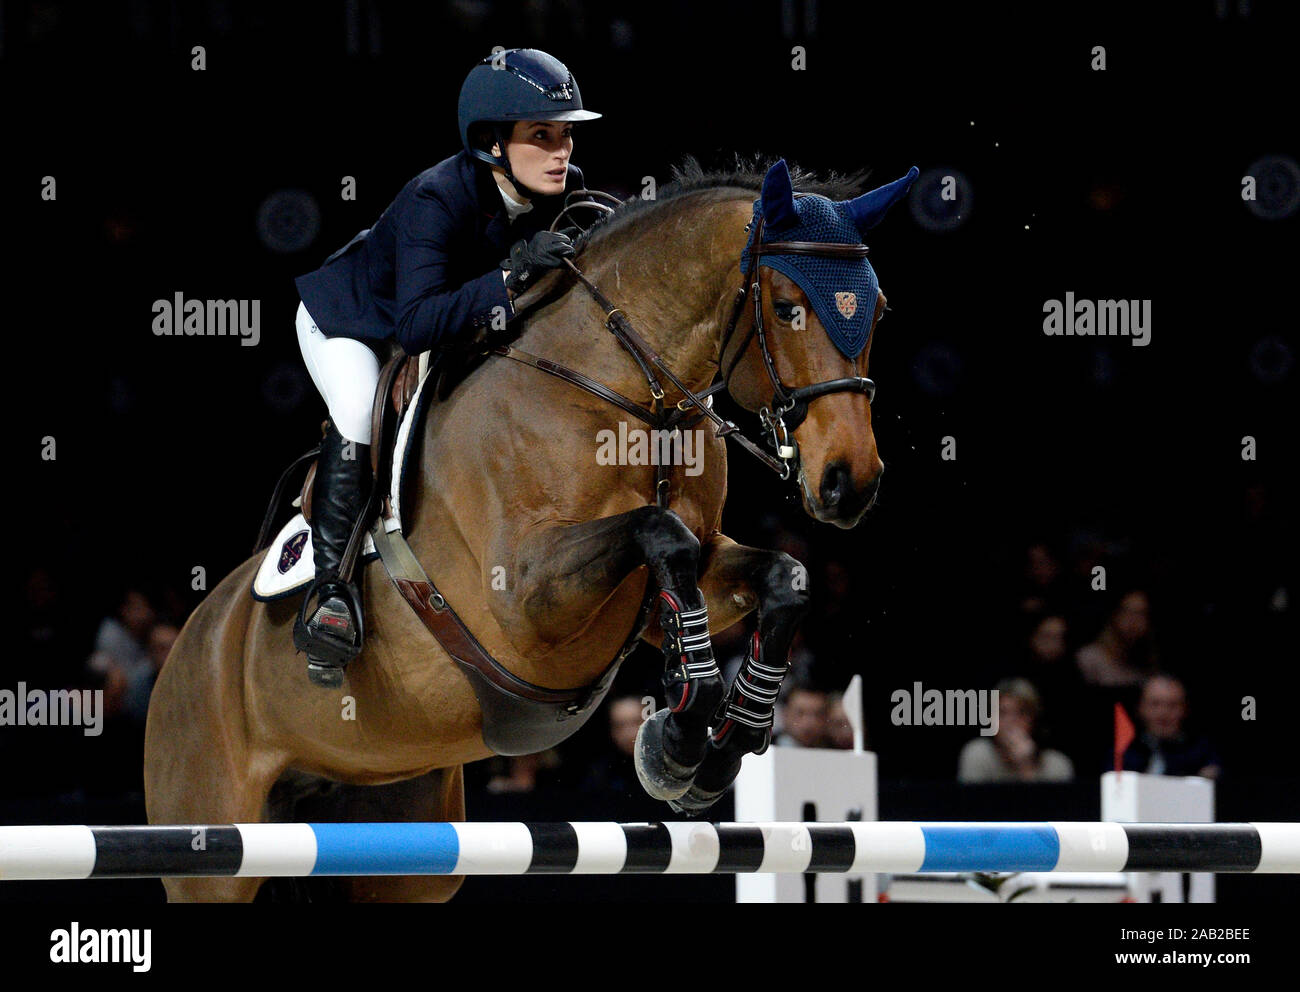 Prague, Czech Republic. 23rd Nov, 2019. Showjumper Jessica Springsteen with horse RMF Zecilie competes during the Prague PlayOffs show jumping, Global Champions series, on November 23, 2019. Credit: Katerina Sulova/CTK Photo/Alamy Live News Stock Photo